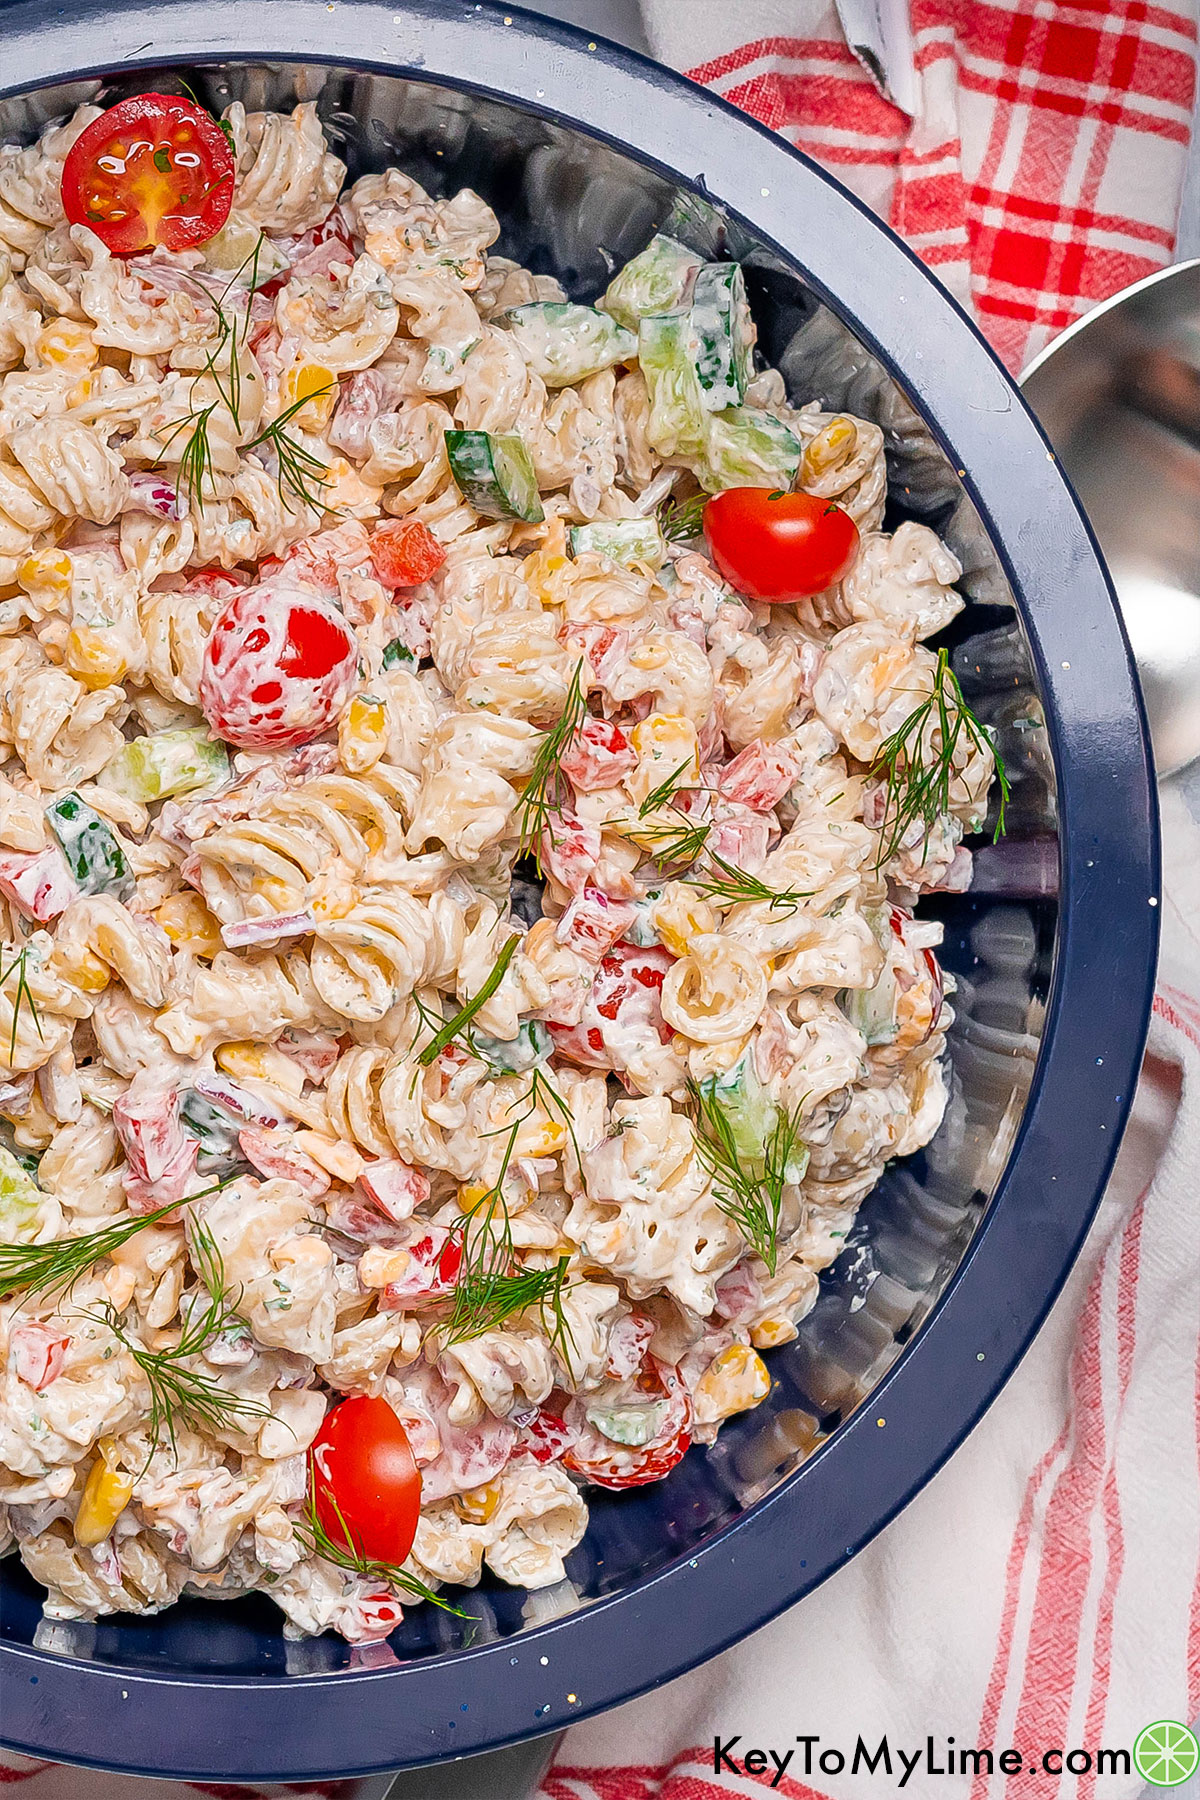 An overhead image of a large serving bowl of pasta salad with cherry tomatoes and cucumber throughout.